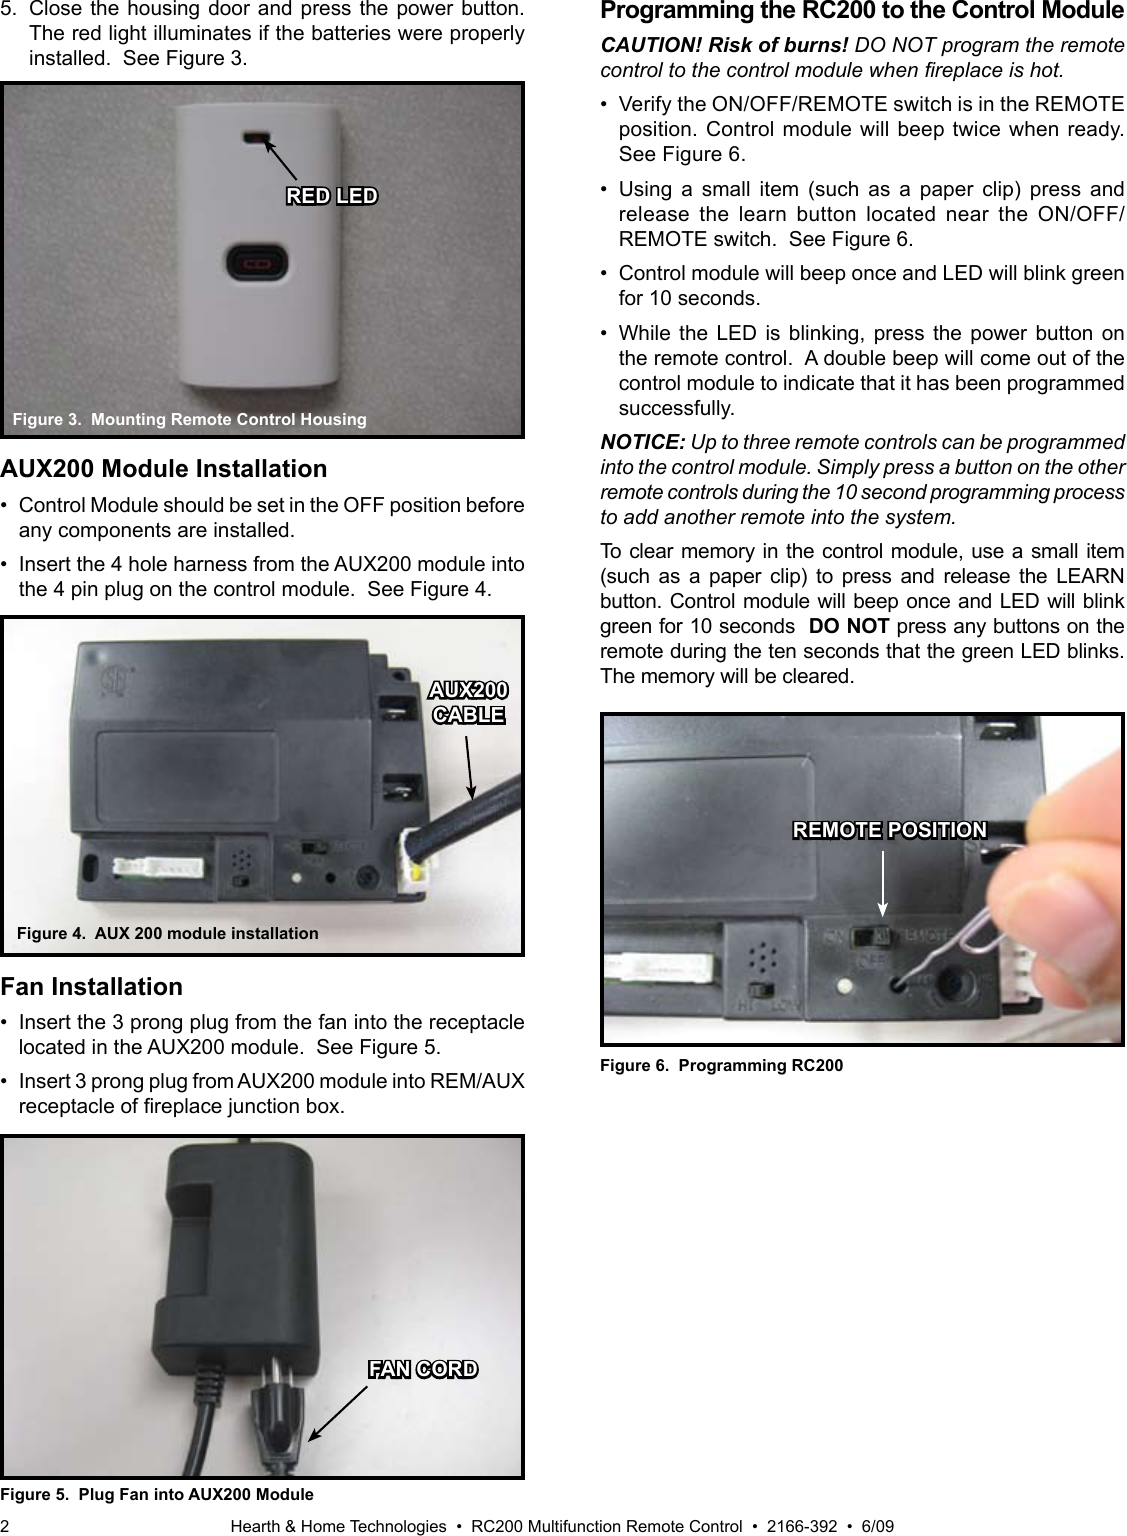 Hearth &amp; Home Technologies  •  RC200 Multifunction Remote Control  •  2166-392  •  6/092Figure 3.  Mounting Remote Control Housing5.  Close the housing door and press the power button. The red light illuminates if the batteries were properly installed.  See Figure 3.Figure 6.  Programming RC200REMOTE POSITIONFan Installation•  Insert the 3 prong plug from the fan into the receptacle located in the AUX200 module.  See Figure 5.•  Insert 3 prong plug from AUX200 module into REM/AUX receptacleofreplacejunctionbox.Figure 5.  Plug Fan into AUX200 ModuleFigure 4.  AUX 200 module installationProgramming the RC200 to the Control ModuleCAUTION! Risk of burns! DO NOT program the remote control to the control module when replace is hot.•  Verify the ON/OFF/REMOTE switch is in the REMOTE position. Control module will beep twice when ready. See Figure 6.•  Using a  small  item  (such  as  a  paper  clip)  press  and release  the  learn  button  located  near  the  ON/OFF/REMOTE switch.  See Figure 6.•  Control module will beep once and LED will blink green for 10 seconds. •  While  the  LED  is  blinking,  press  the  power  button  on the remote control.  A double beep will come out of the control module to indicate that it has been programmed successfully.NOTICE: Up to three remote controls can be programmed into the control module. Simply press a button on the other remote controls during the 10 second programming process to add another remote into the system.To clear memory in the control module, use a small item (such  as  a  paper  clip)  to  press  and  release  the  LEARN button. Control module will beep once and LED will blink green for 10 seconds  DO NOT press any buttons on the remote during the ten seconds that the green LED blinks. The memory will be cleared.RED LEDAUX200CABLEFAN CORDAUX200 Module Installation•  Control Module should be set in the OFF position before any components are installed.•  Insert the 4 hole harness from the AUX200 module into the 4 pin plug on the control module.  See Figure 4.